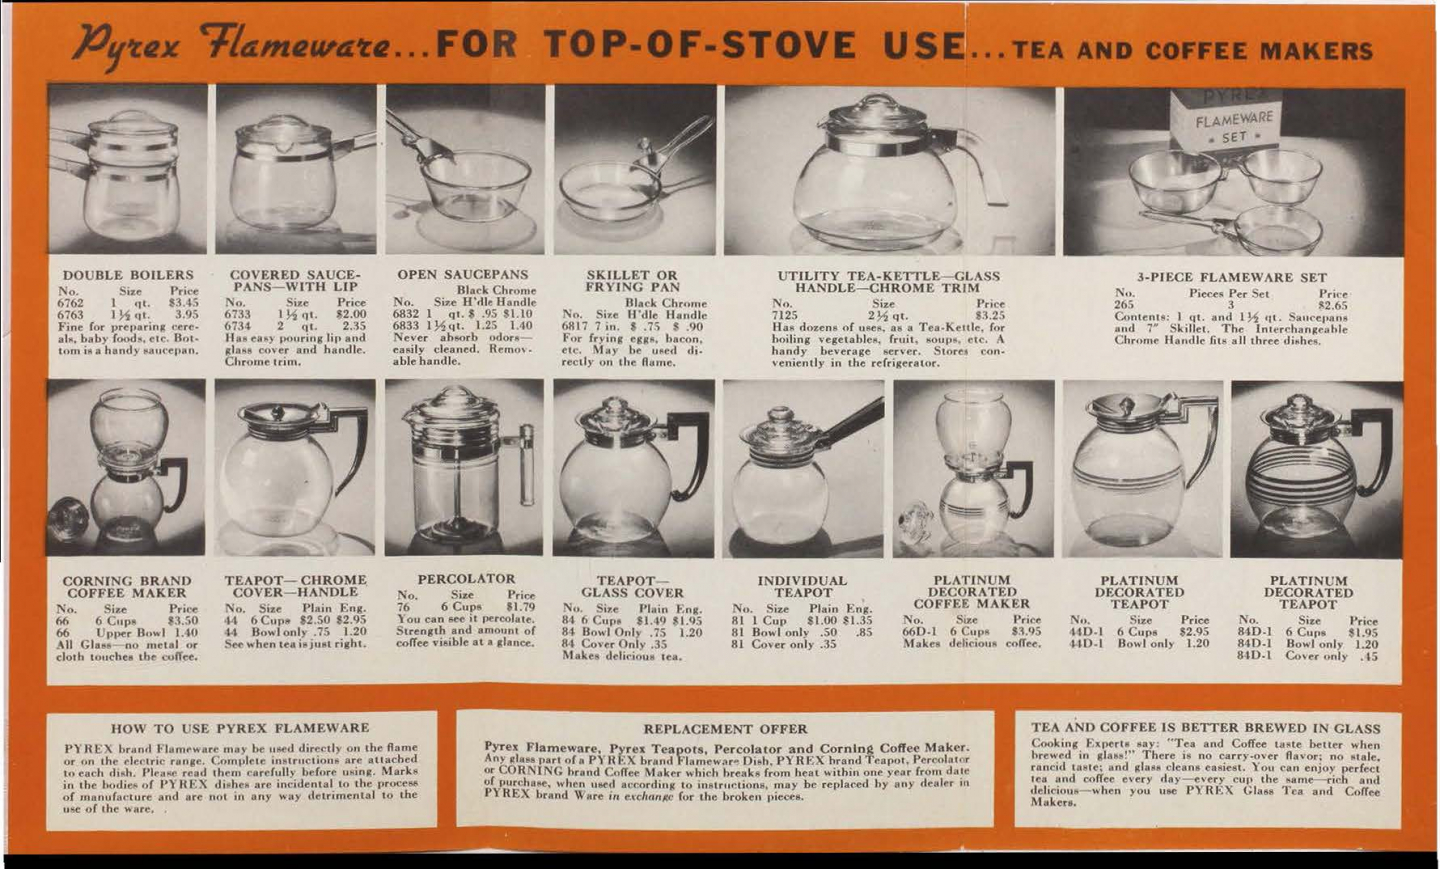 Flameware page from “Save up to 1/2 on Pyrex ovenware”